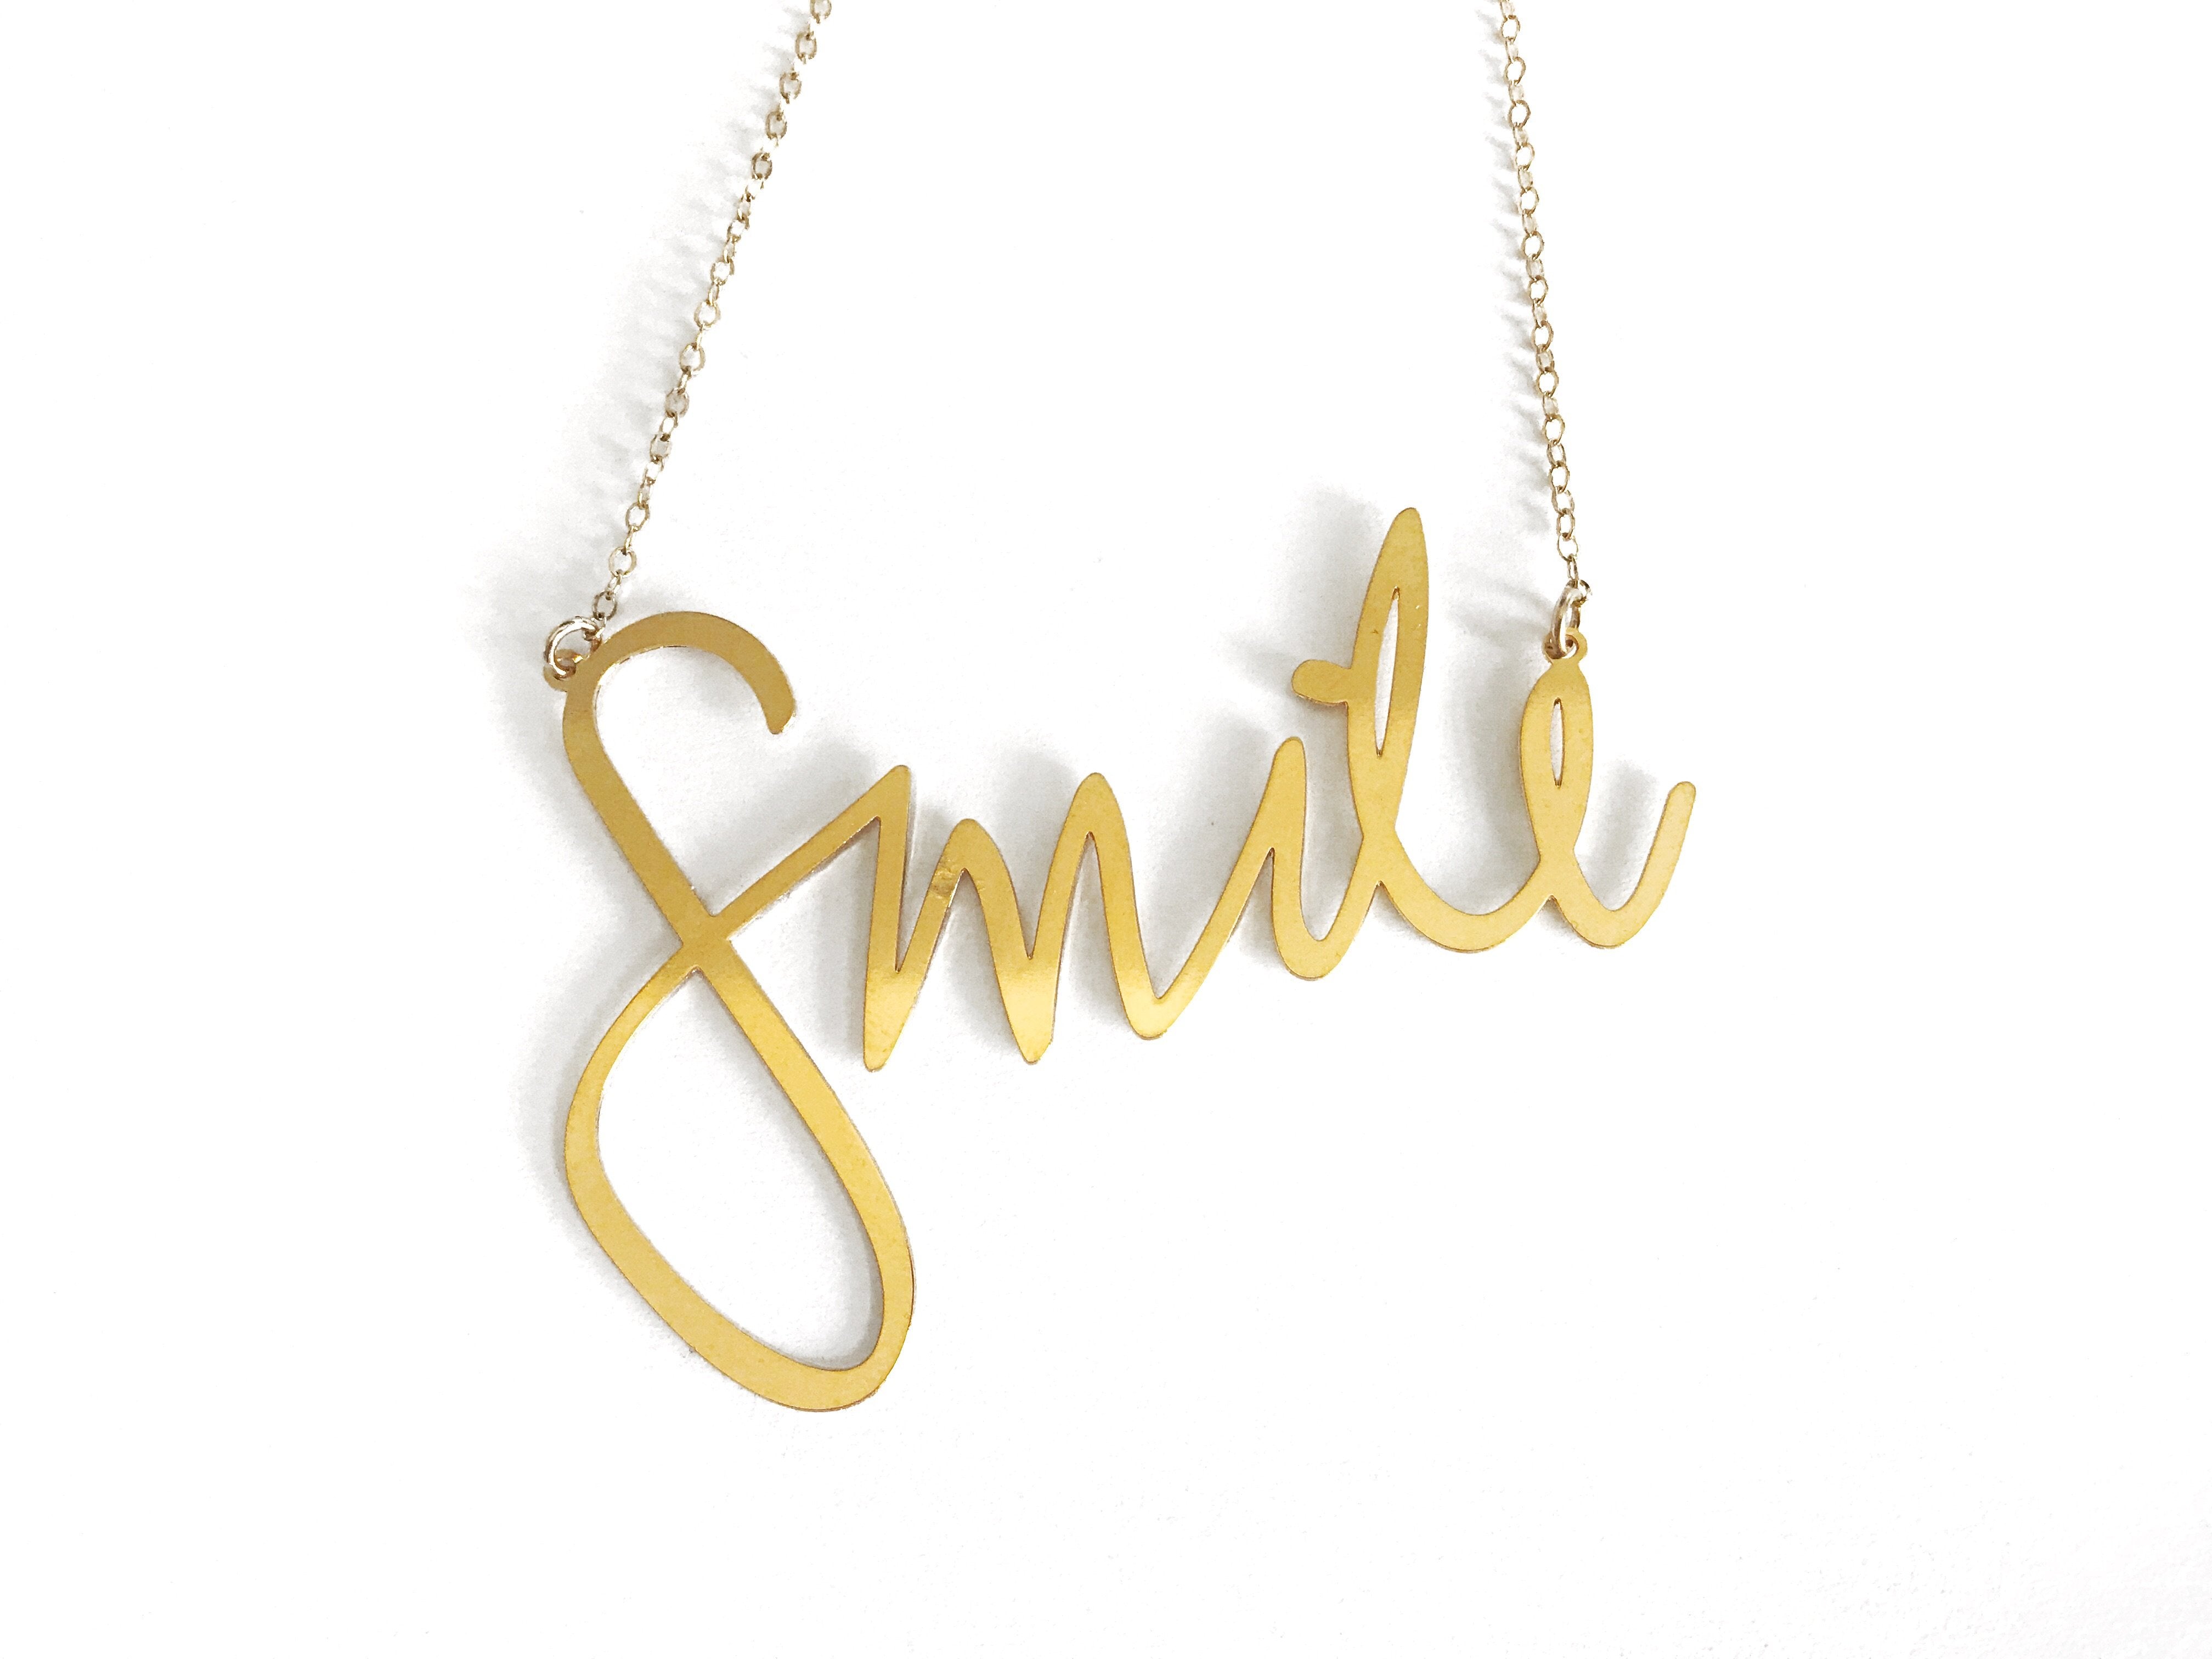 Smile - Large Necklace - Brevity Jewelry - Made in USA - Affordable Gold and Silver Jewelry